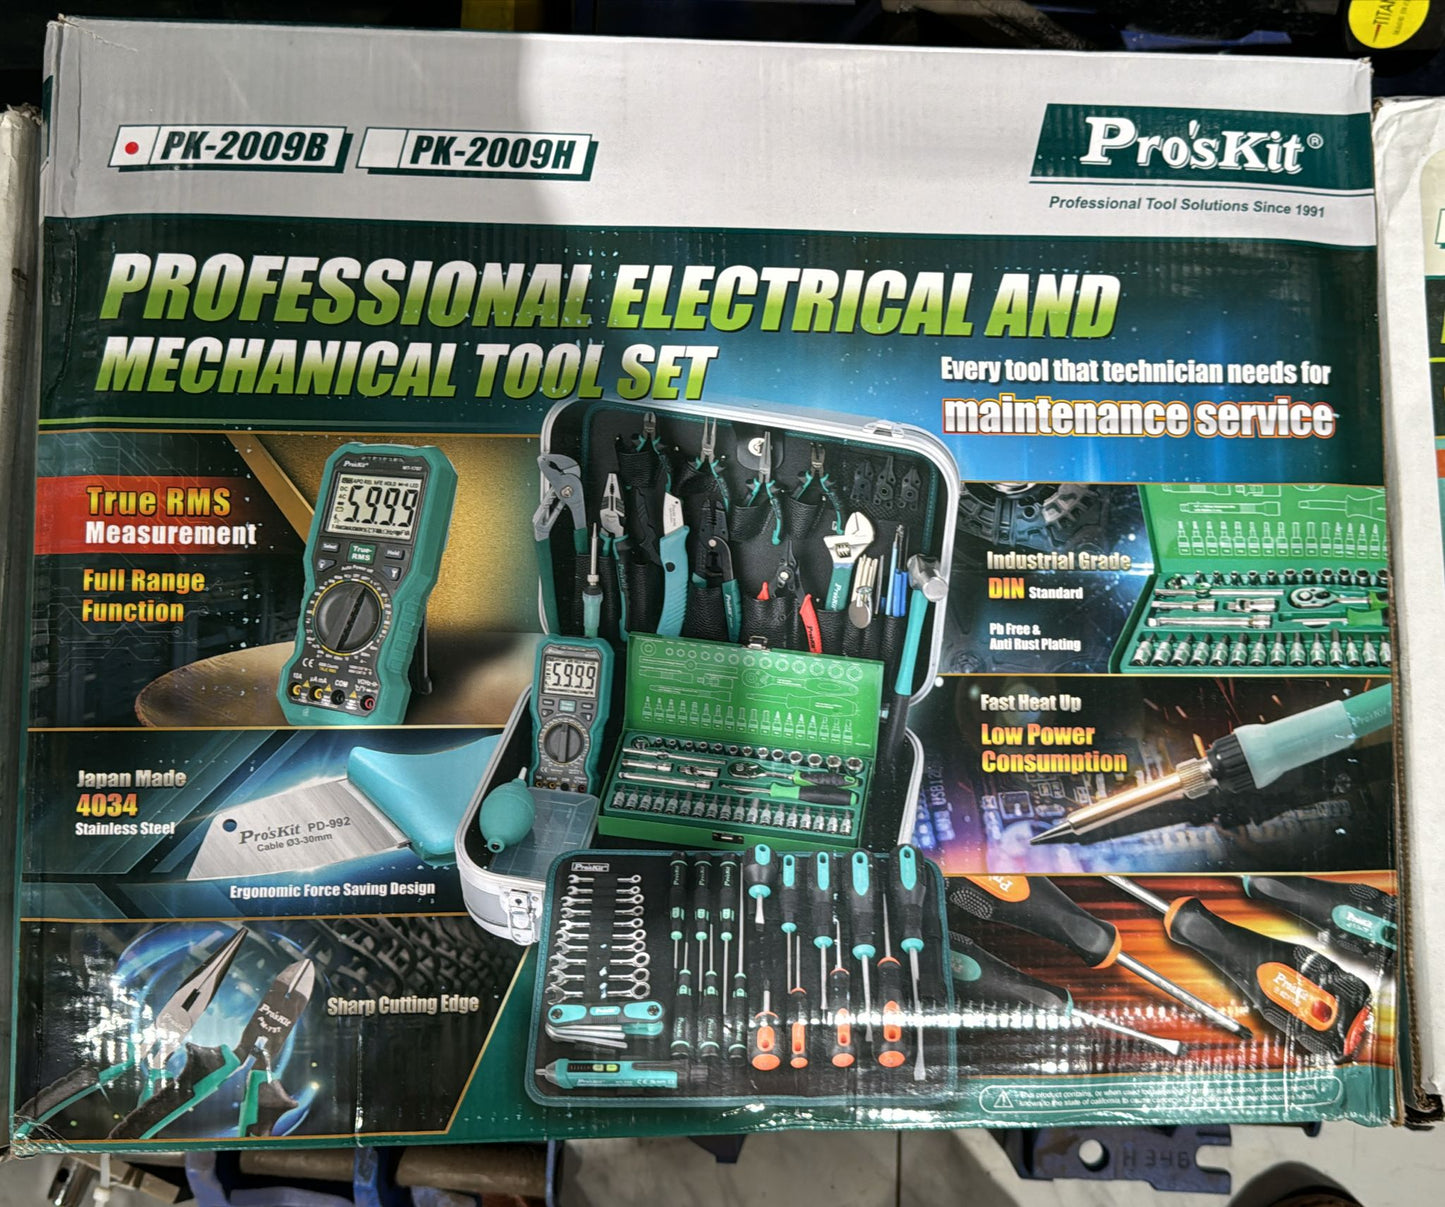 Pro'skit PK-2009B, the professional electrical and mechanical tool set